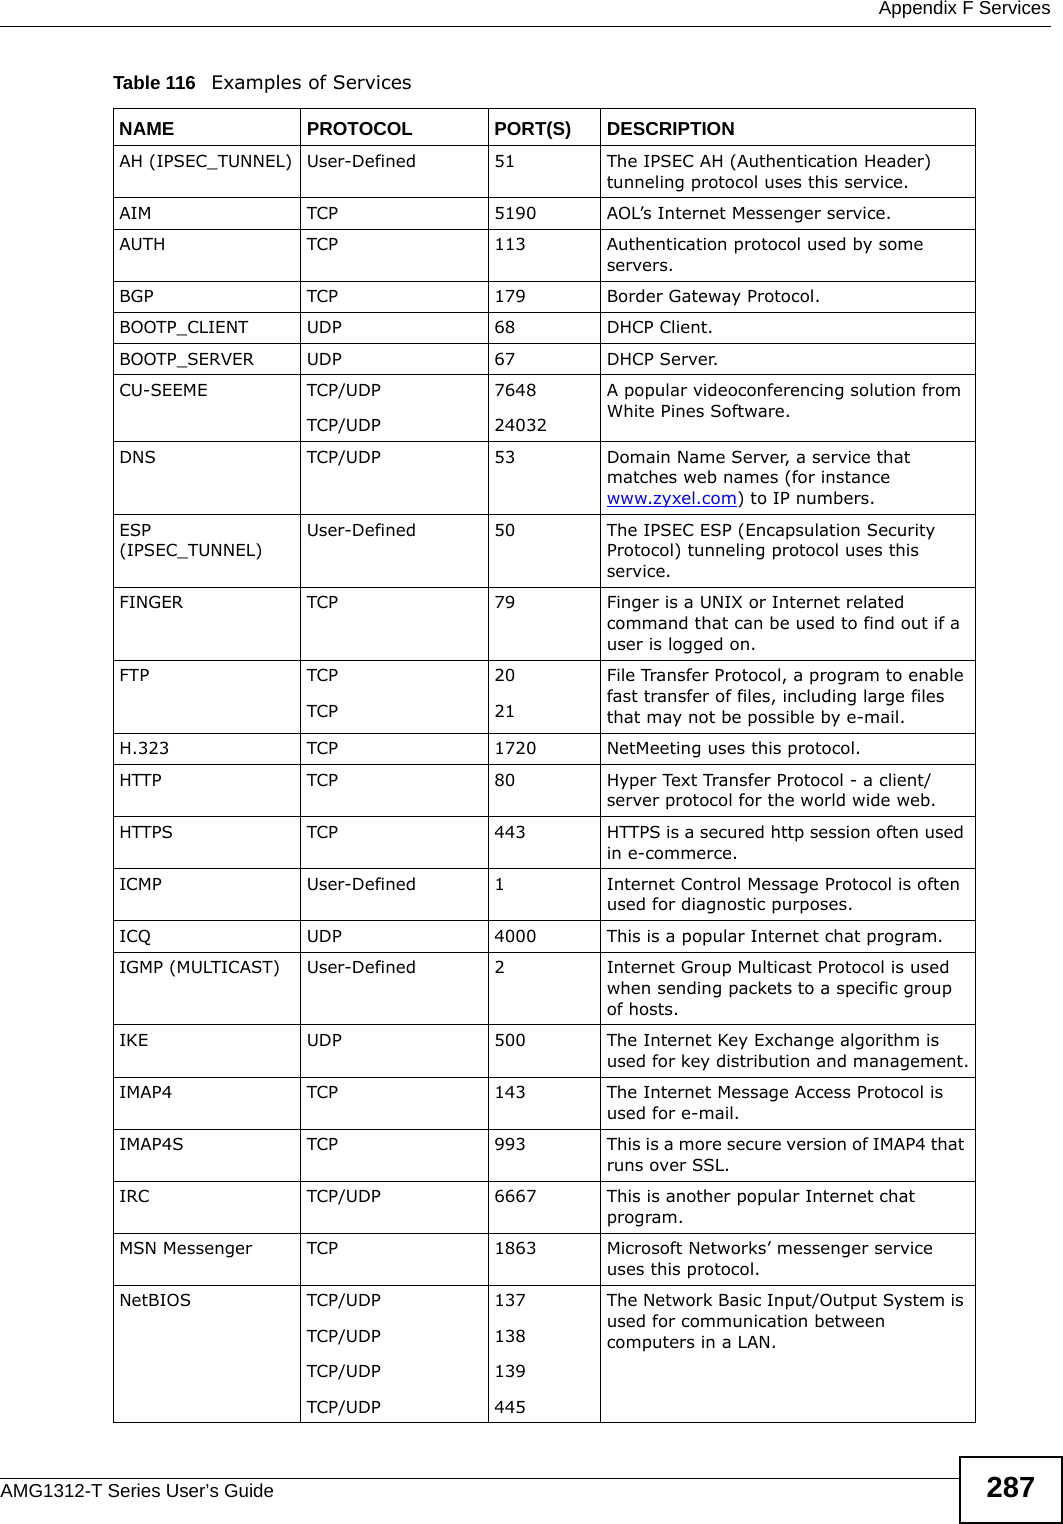  Appendix F ServicesAMG1312-T Series User’s Guide 287Table 116   Examples of ServicesNAME PROTOCOL PORT(S) DESCRIPTIONAH (IPSEC_TUNNEL) User-Defined 51 The IPSEC AH (Authentication Header) tunneling protocol uses this service.AIM TCP 5190 AOL’s Internet Messenger service.AUTH TCP 113 Authentication protocol used by some servers.BGP TCP 179 Border Gateway Protocol.BOOTP_CLIENT UDP 68 DHCP Client.BOOTP_SERVER UDP 67 DHCP Server.CU-SEEME TCP/UDPTCP/UDP 764824032A popular videoconferencing solution from White Pines Software.DNS TCP/UDP 53 Domain Name Server, a service that matches web names (for instance www.zyxel.com) to IP numbers.ESP (IPSEC_TUNNEL)User-Defined 50 The IPSEC ESP (Encapsulation Security Protocol) tunneling protocol uses this service.FINGER TCP 79 Finger is a UNIX or Internet related command that can be used to find out if a user is logged on.FTP TCPTCP2021File Transfer Protocol, a program to enable fast transfer of files, including large files that may not be possible by e-mail.H.323 TCP 1720 NetMeeting uses this protocol.HTTP TCP 80 Hyper Text Transfer Protocol - a client/server protocol for the world wide web.HTTPS TCP 443 HTTPS is a secured http session often used in e-commerce.ICMP User-Defined 1Internet Control Message Protocol is often used for diagnostic purposes.ICQ UDP 4000 This is a popular Internet chat program.IGMP (MULTICAST) User-Defined 2Internet Group Multicast Protocol is used when sending packets to a specific group of hosts.IKE UDP 500 The Internet Key Exchange algorithm is used for key distribution and management.IMAP4 TCP 143 The Internet Message Access Protocol is used for e-mail.IMAP4S TCP 993 This is a more secure version of IMAP4 that runs over SSL.IRC TCP/UDP 6667 This is another popular Internet chat program.MSN Messenger TCP 1863 Microsoft Networks’ messenger service uses this protocol. NetBIOS TCP/UDPTCP/UDPTCP/UDPTCP/UDP137138139445The Network Basic Input/Output System is used for communication between computers in a LAN.